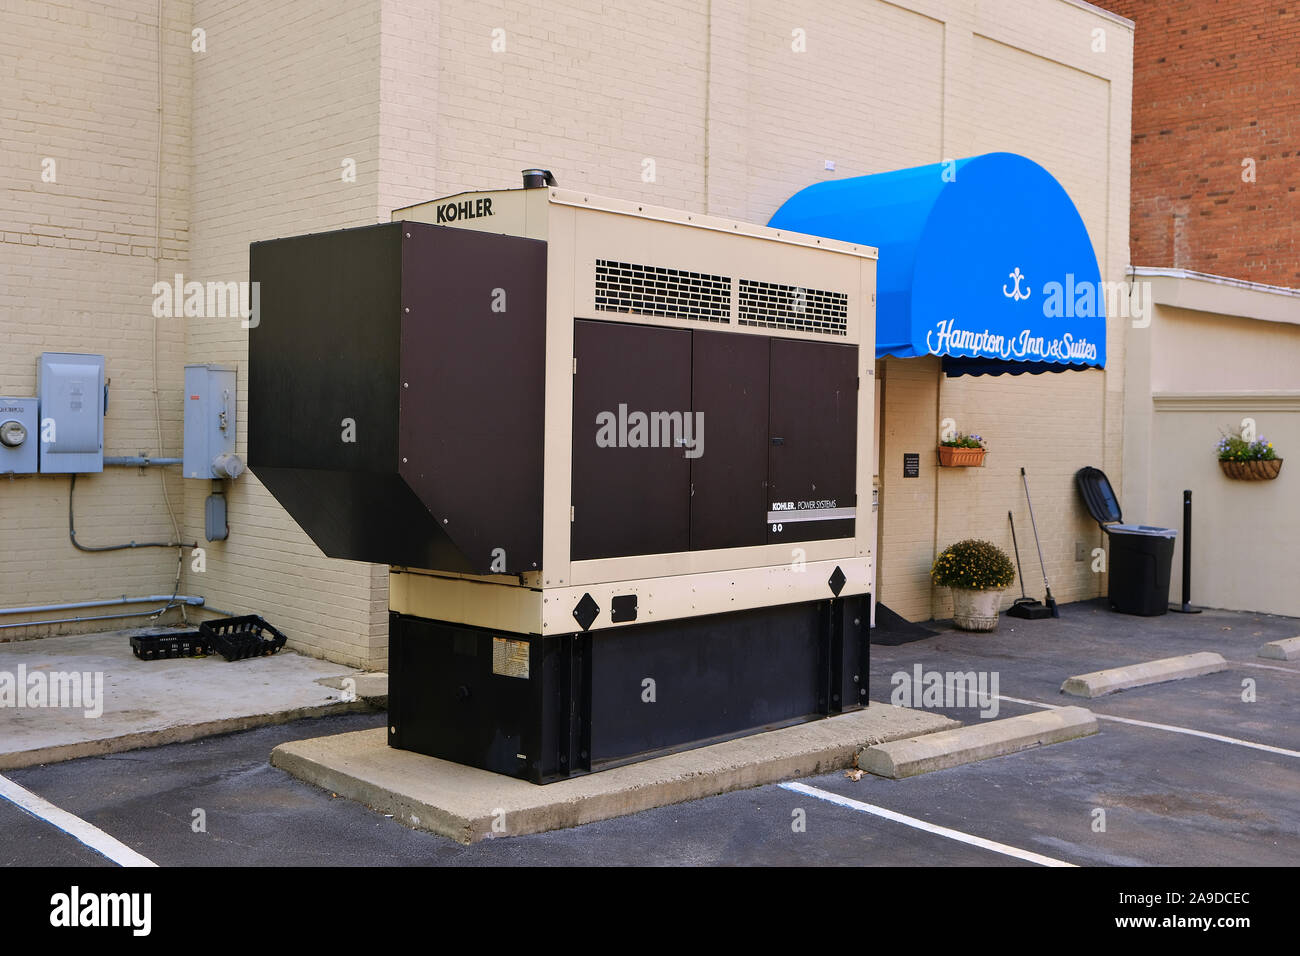 Kohler Power Stations 80 emergency power or electric backup generator at rear of a Hampton Inn hotel in Montgomery Alabama, USA. Stock Photo